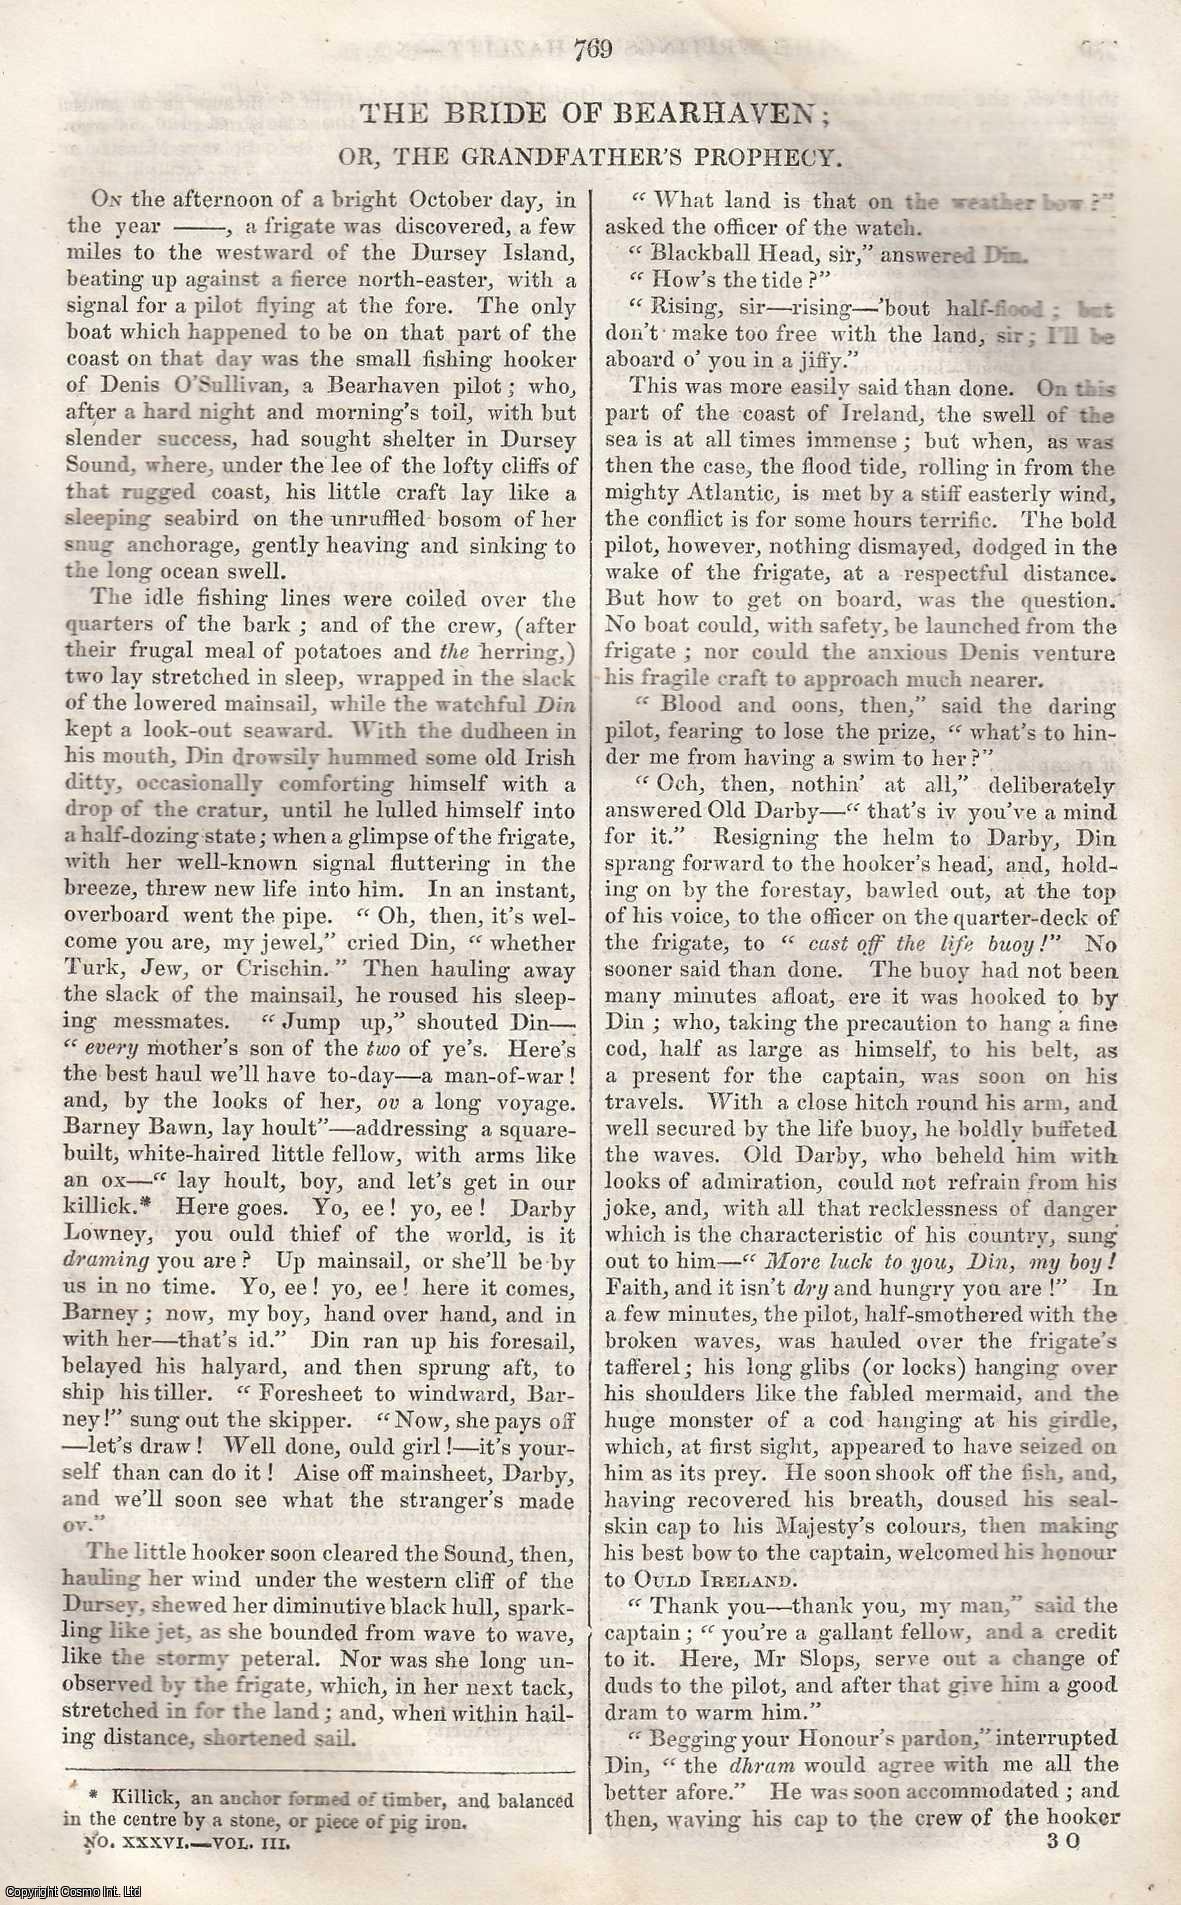 --- - The Bride of Bearhaven; or, The Grandfather's Prophecy. An original article from Tait's Edinburgh Magazine, 1836.